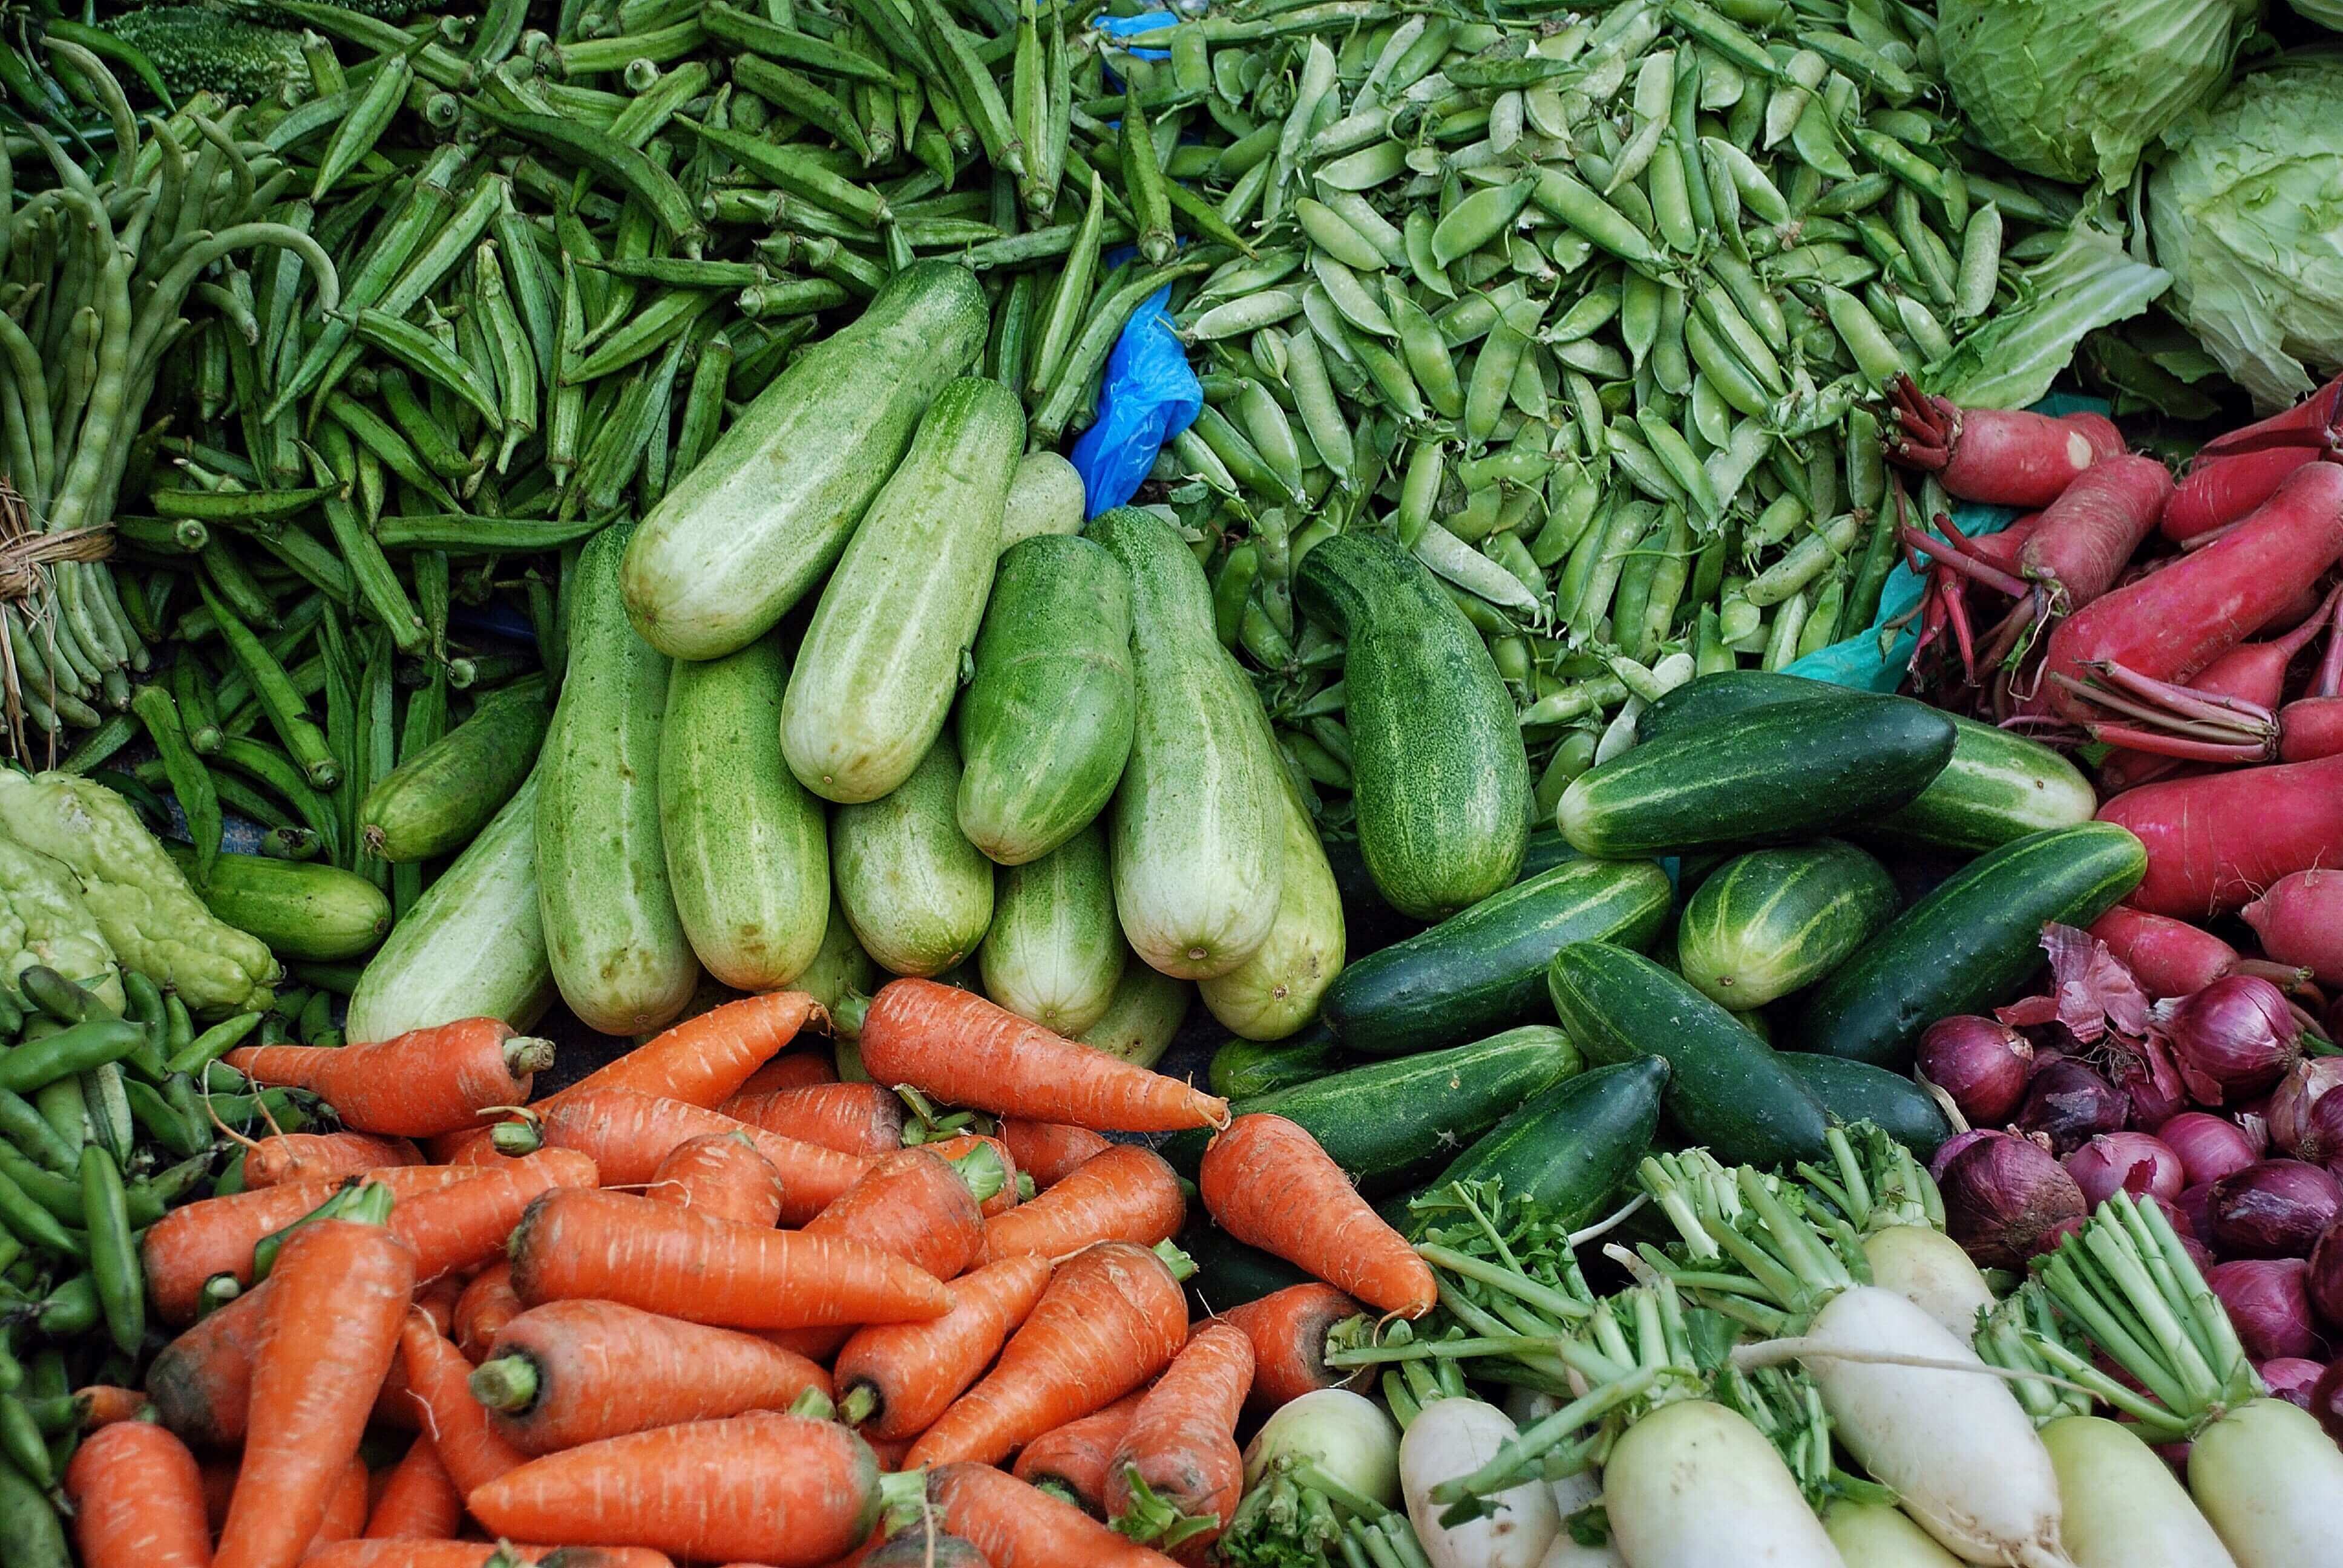 variety of fresh produce, including carrots, cucumbers and peas, at the grocery store